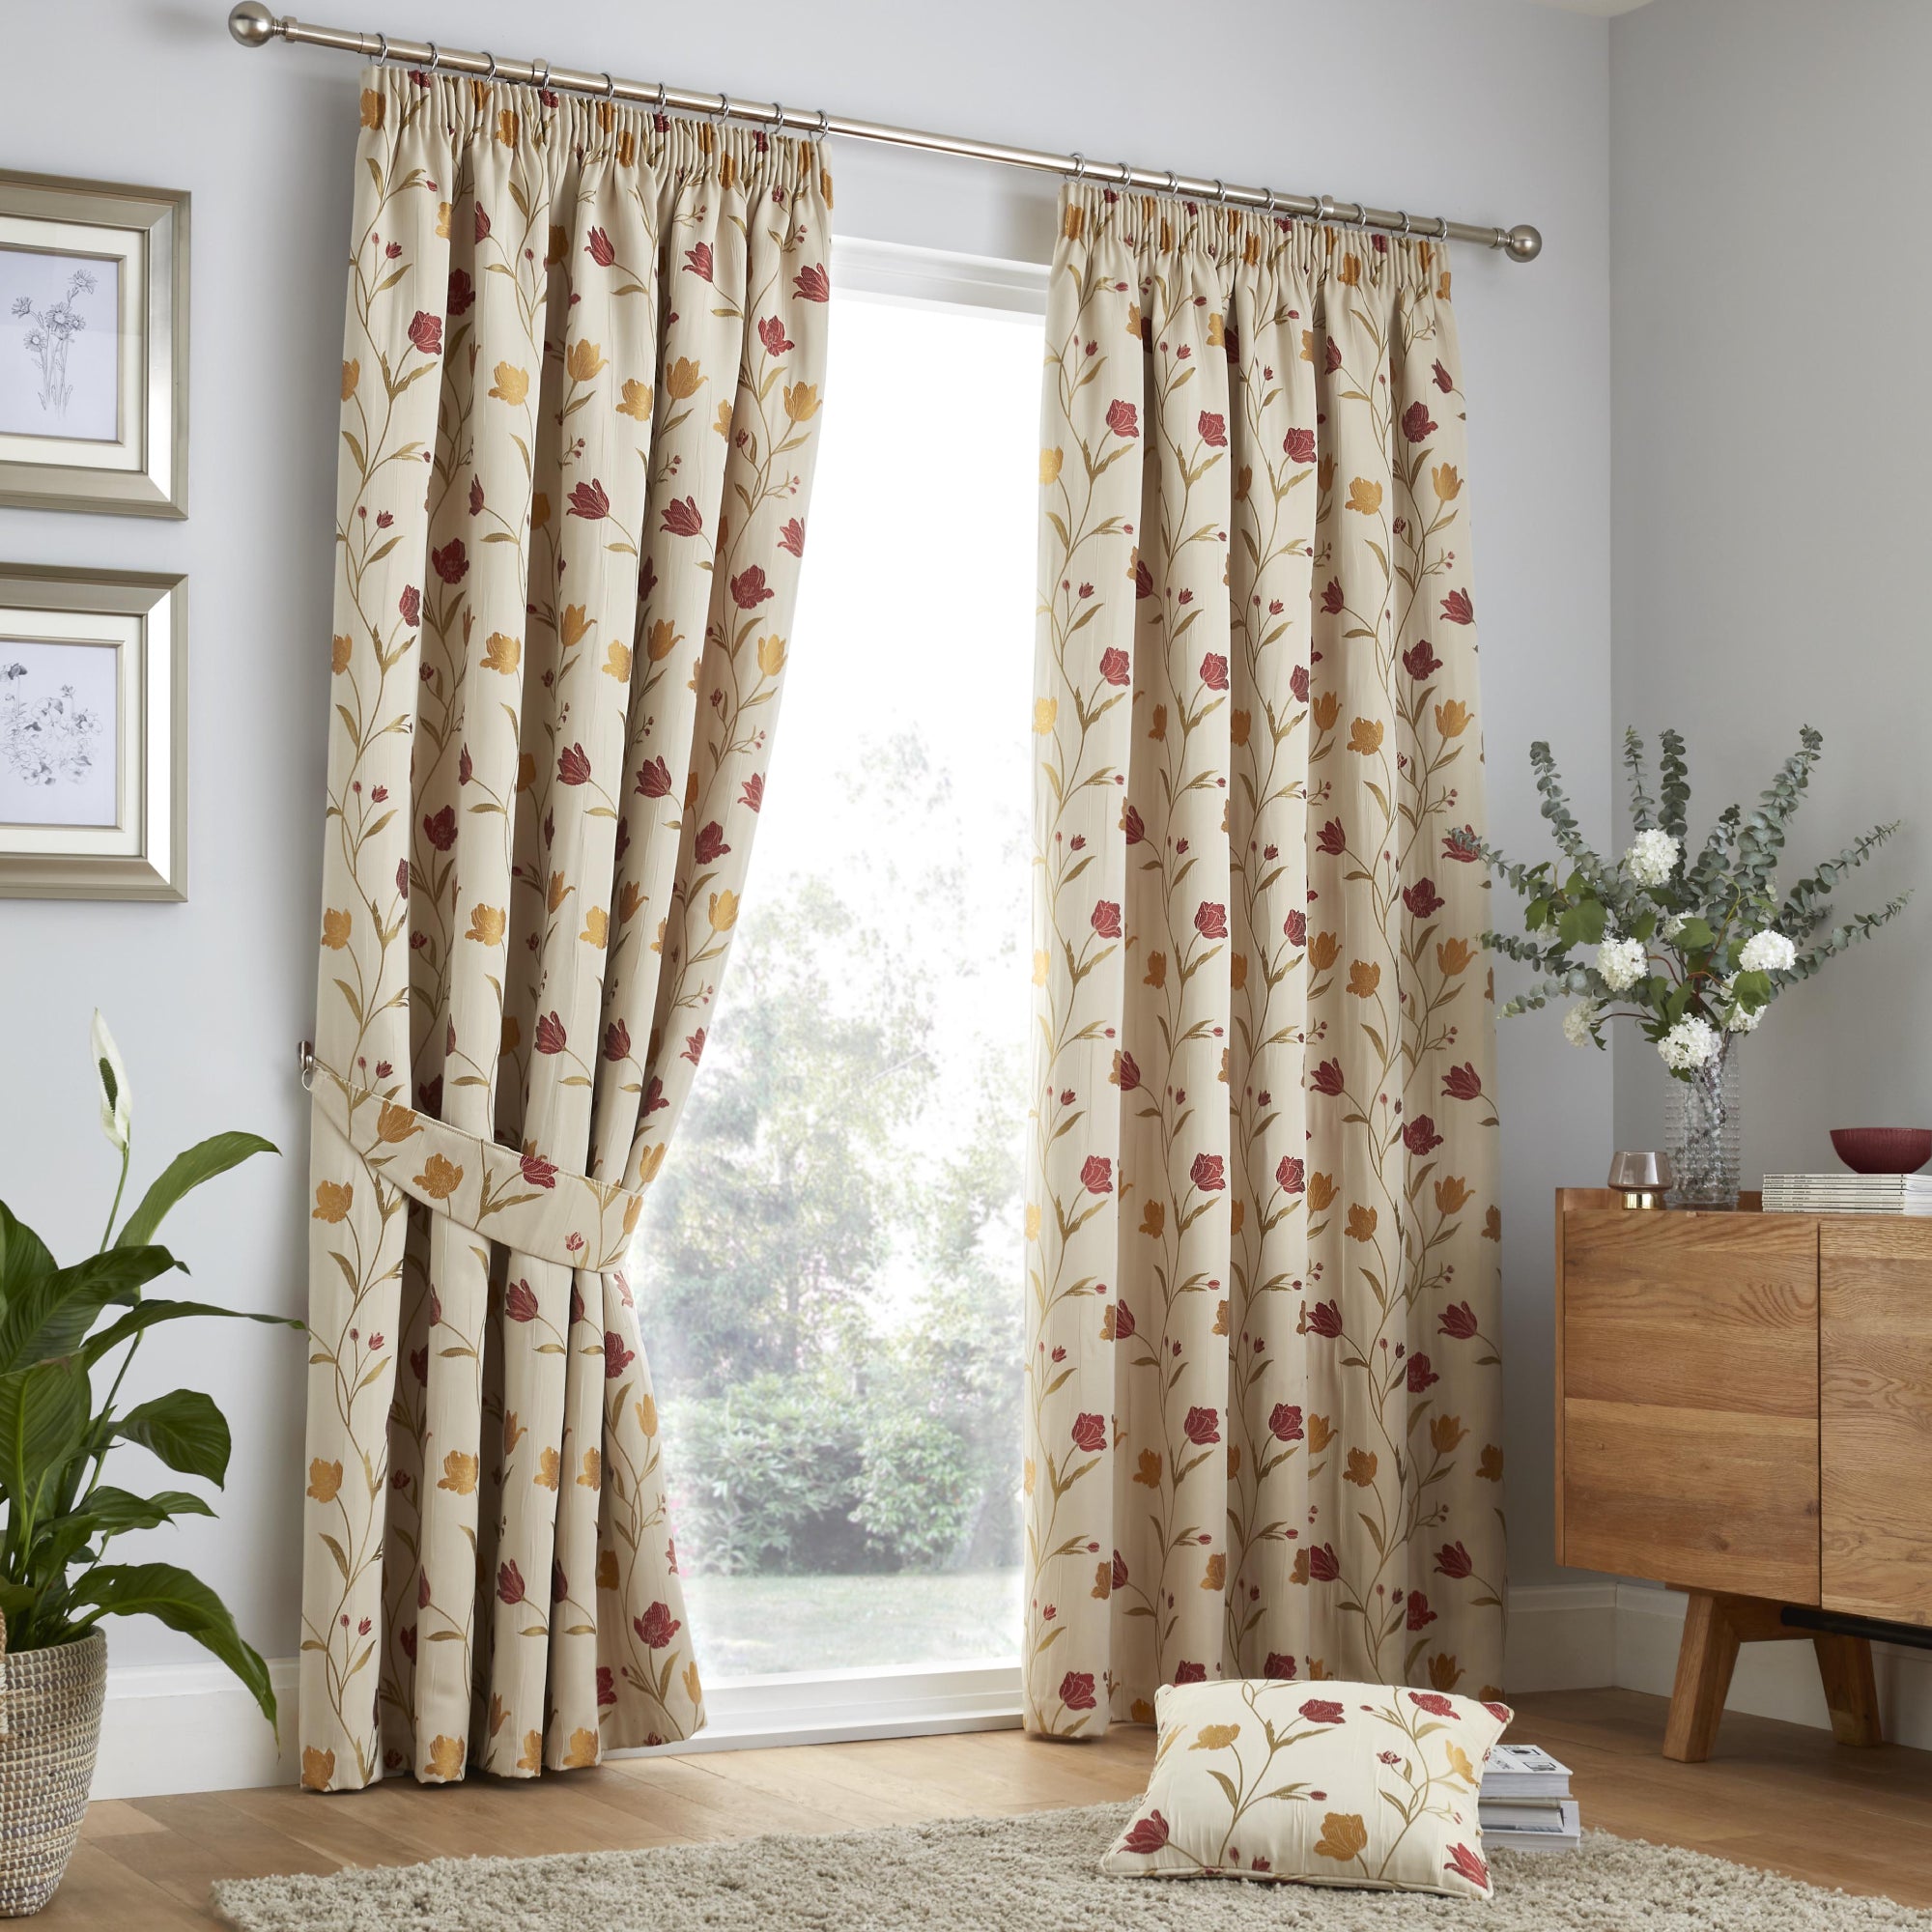 Pair of Pencil Pleat Curtains Juliette by Curtina in Natural & Red